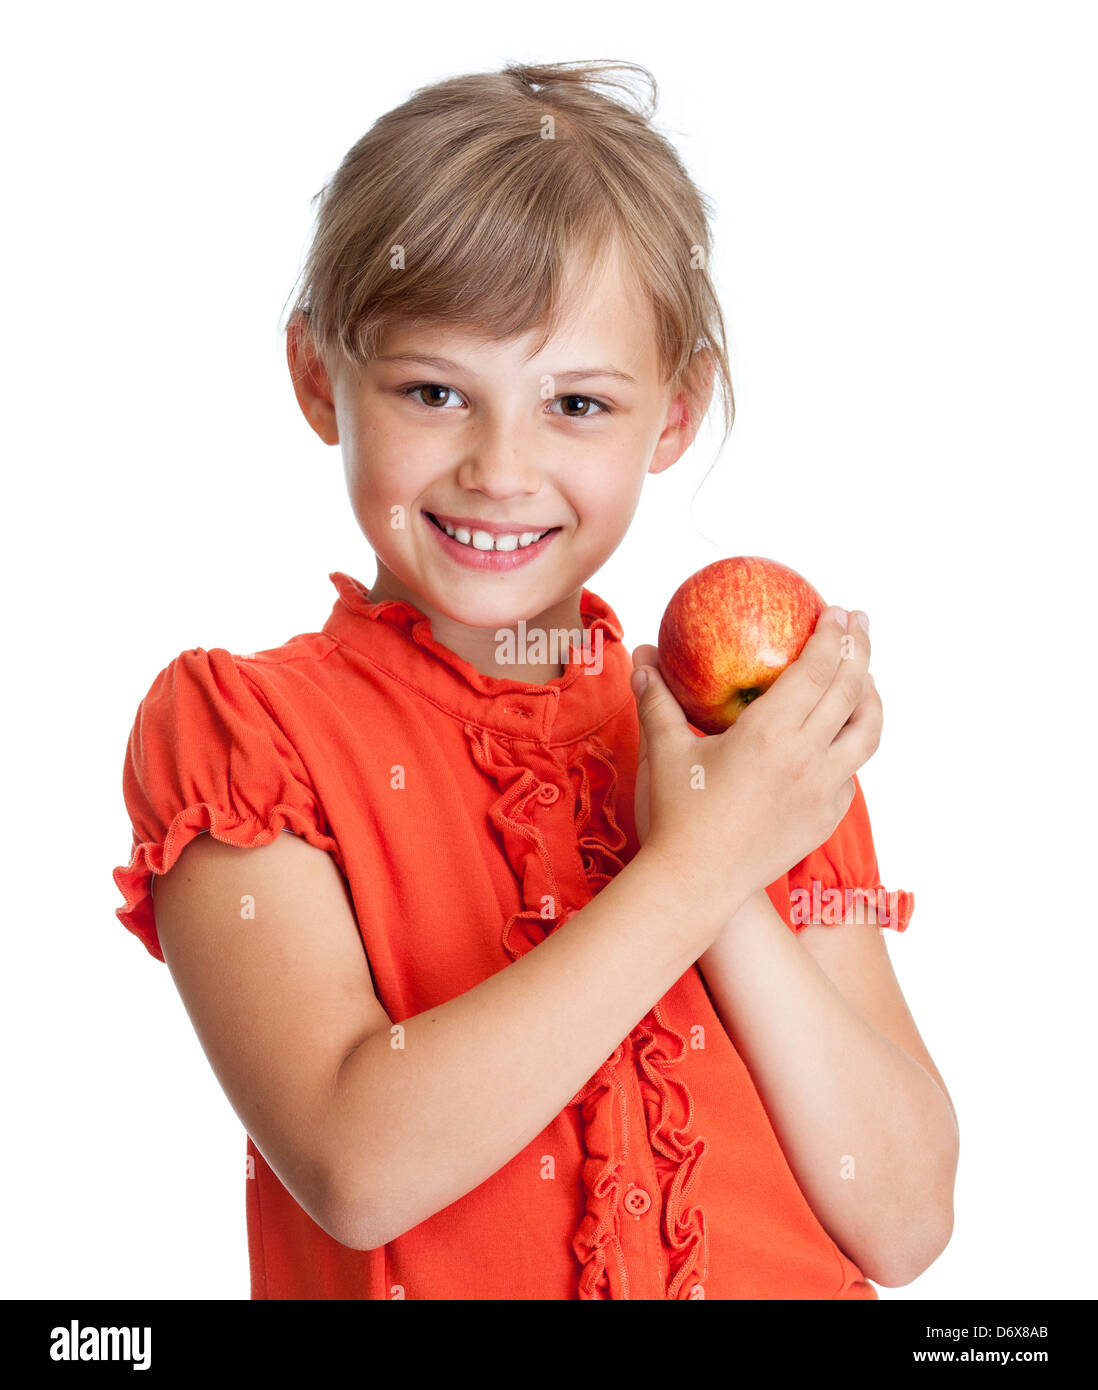 girl eating red apple isolated Stock Photo